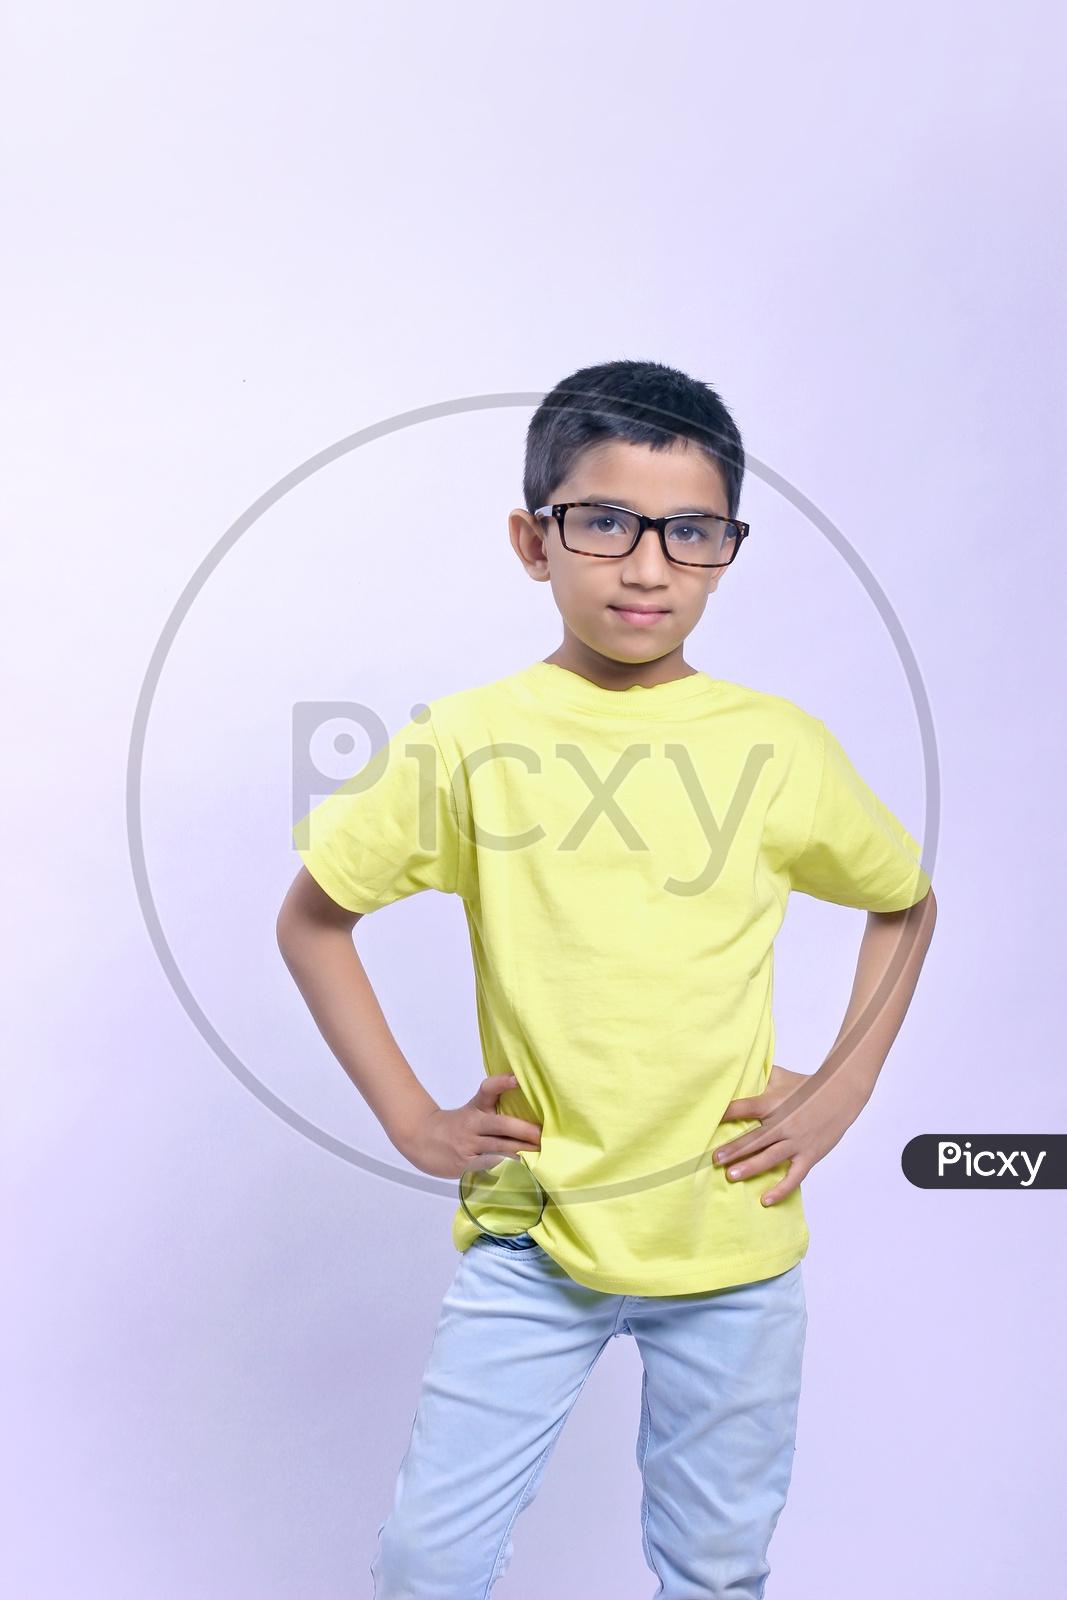 Indian Child on Eyeglass or Indian Kid